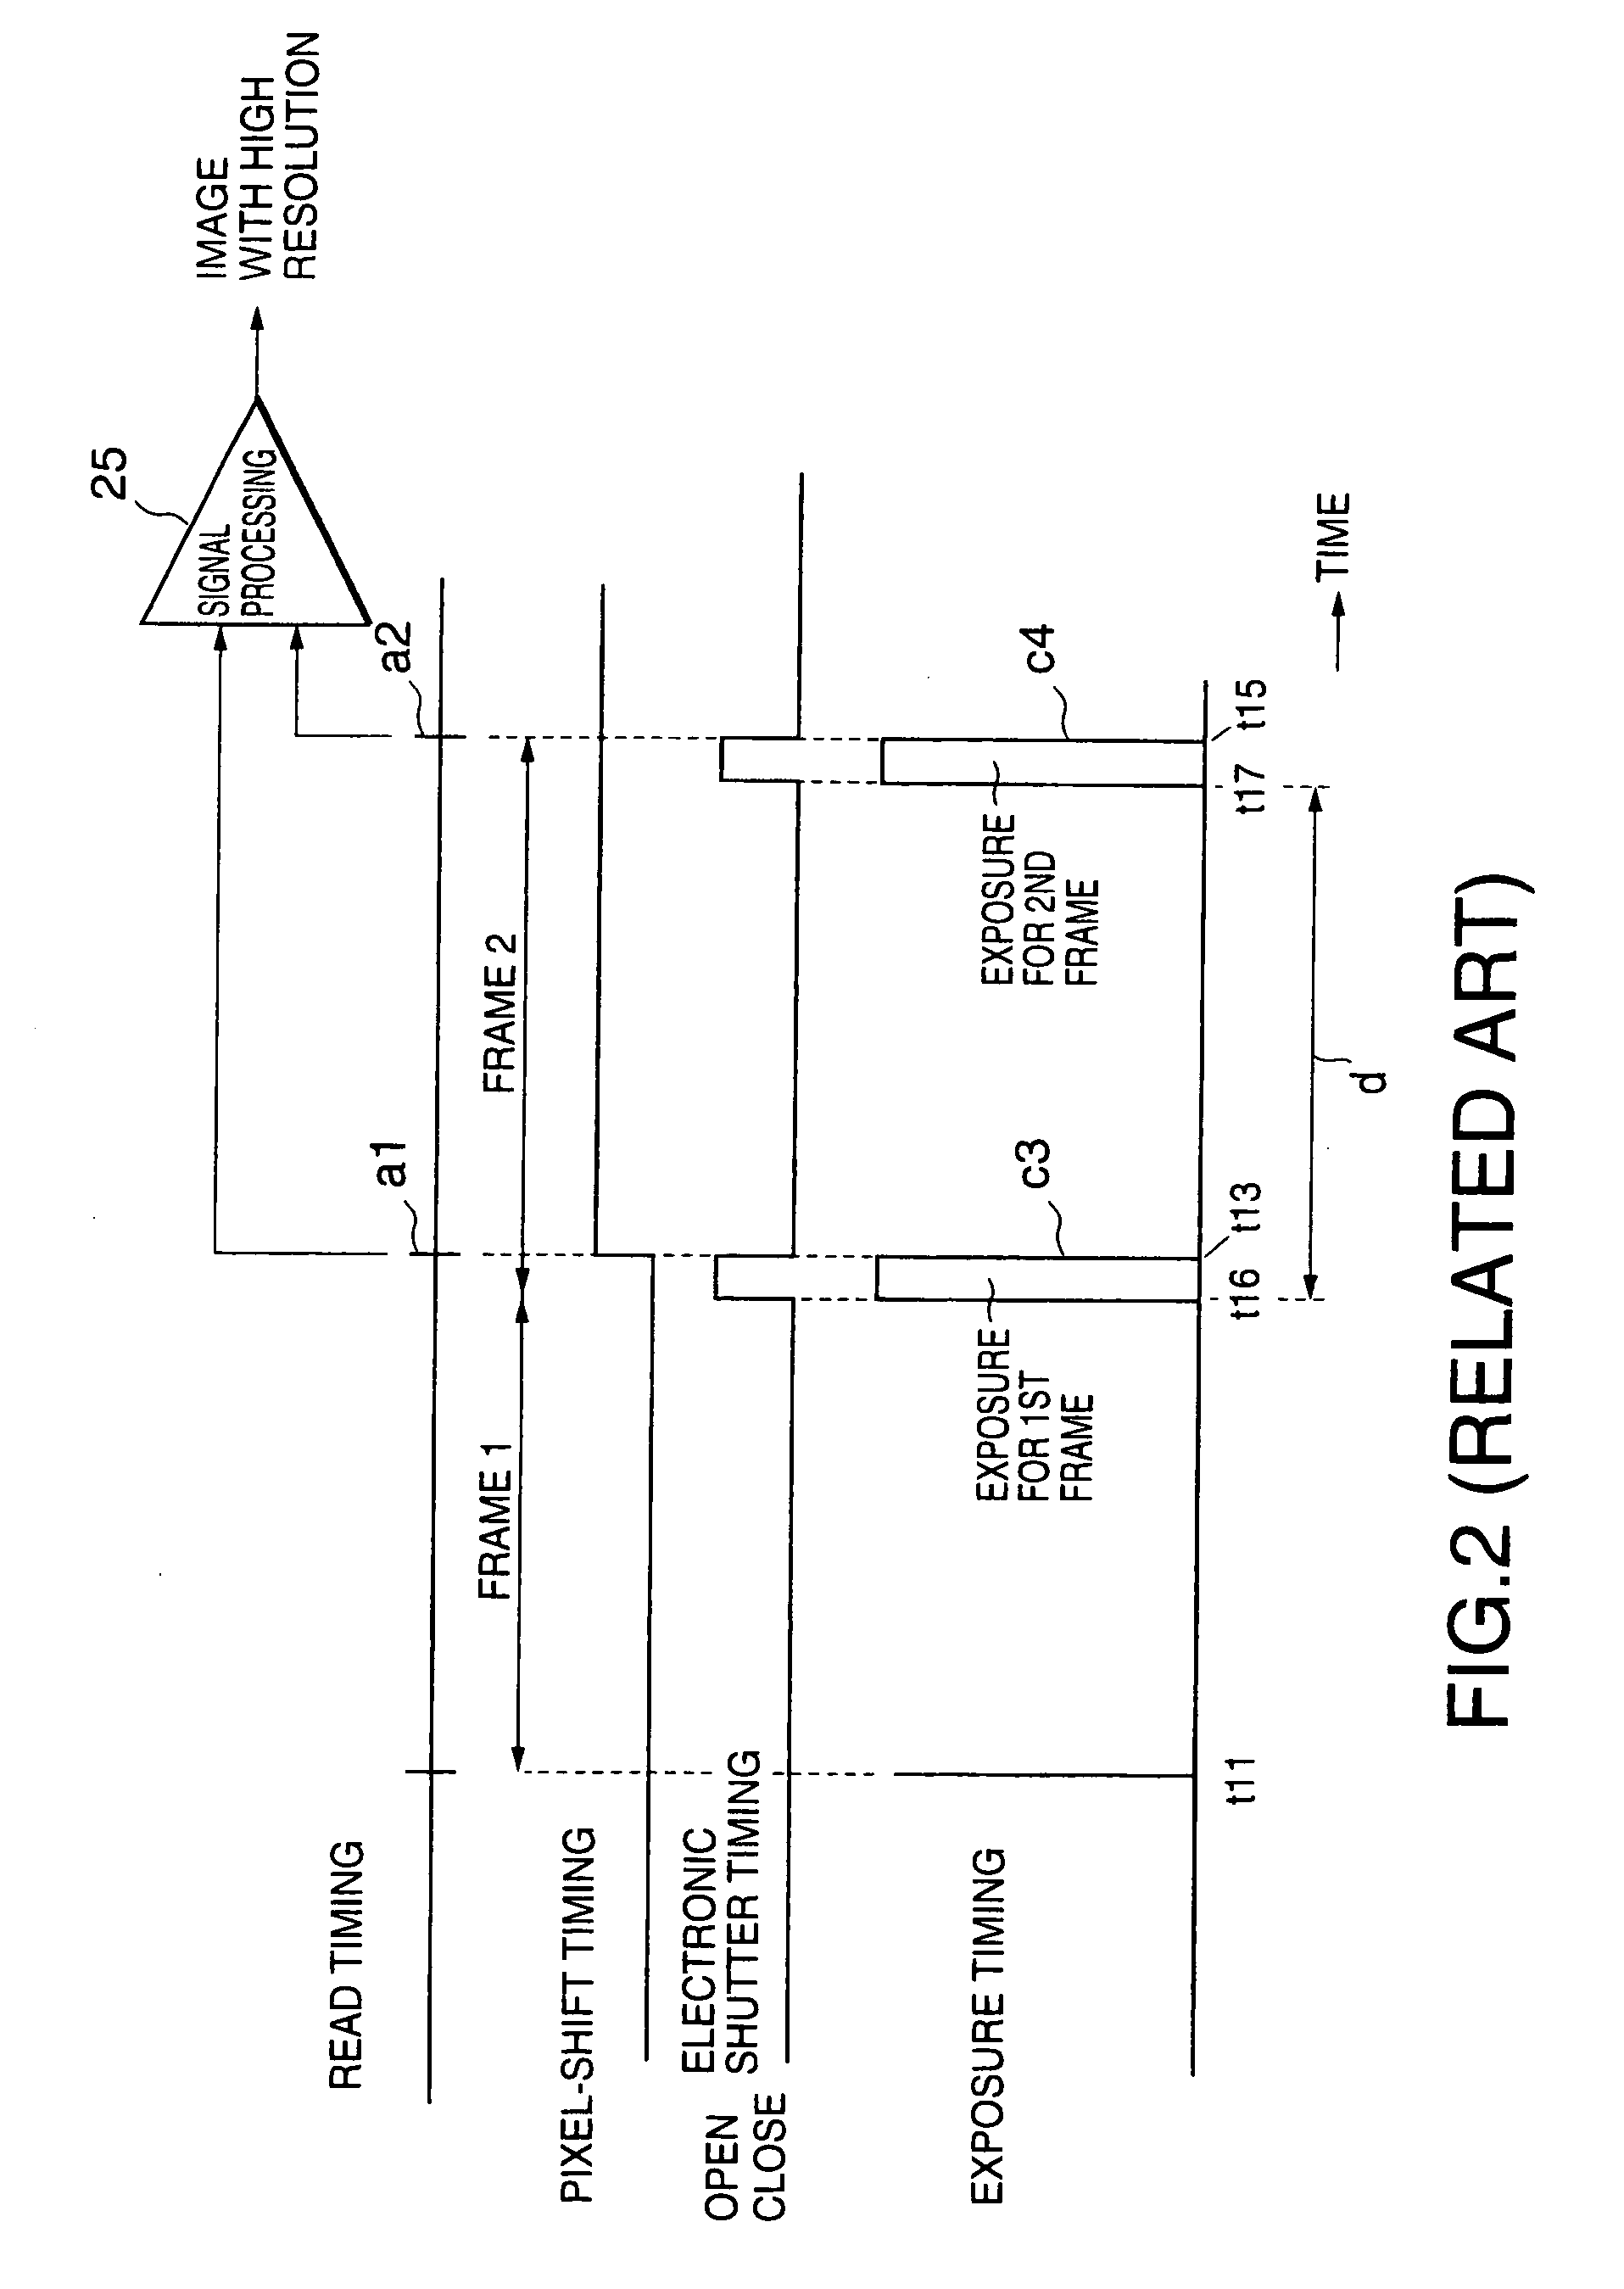 Solid-state image sensing apparatus with a relative positional light shift